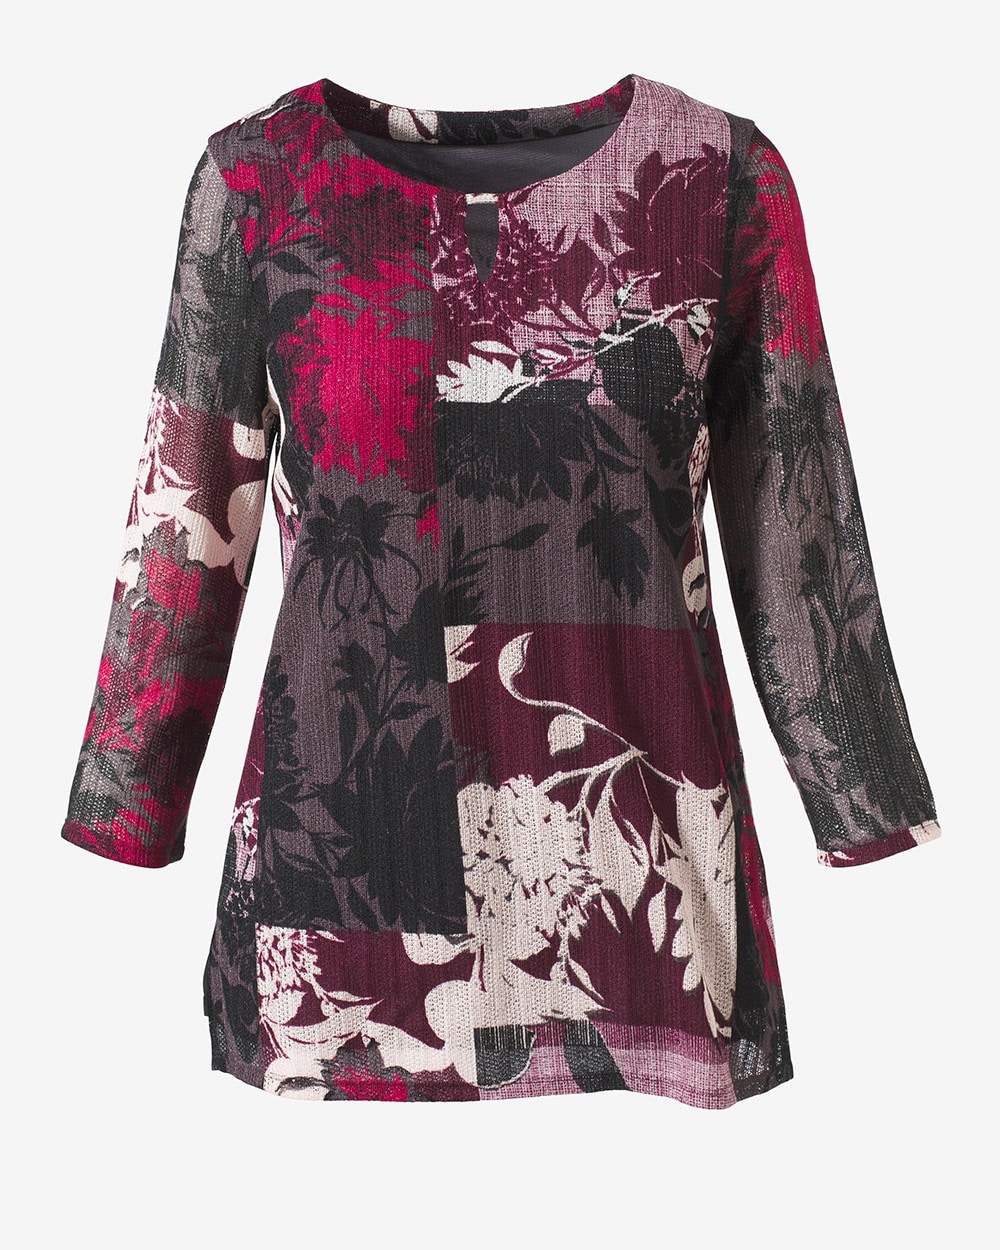 Easywear Abstract Floral 3/4-Sleeve Top